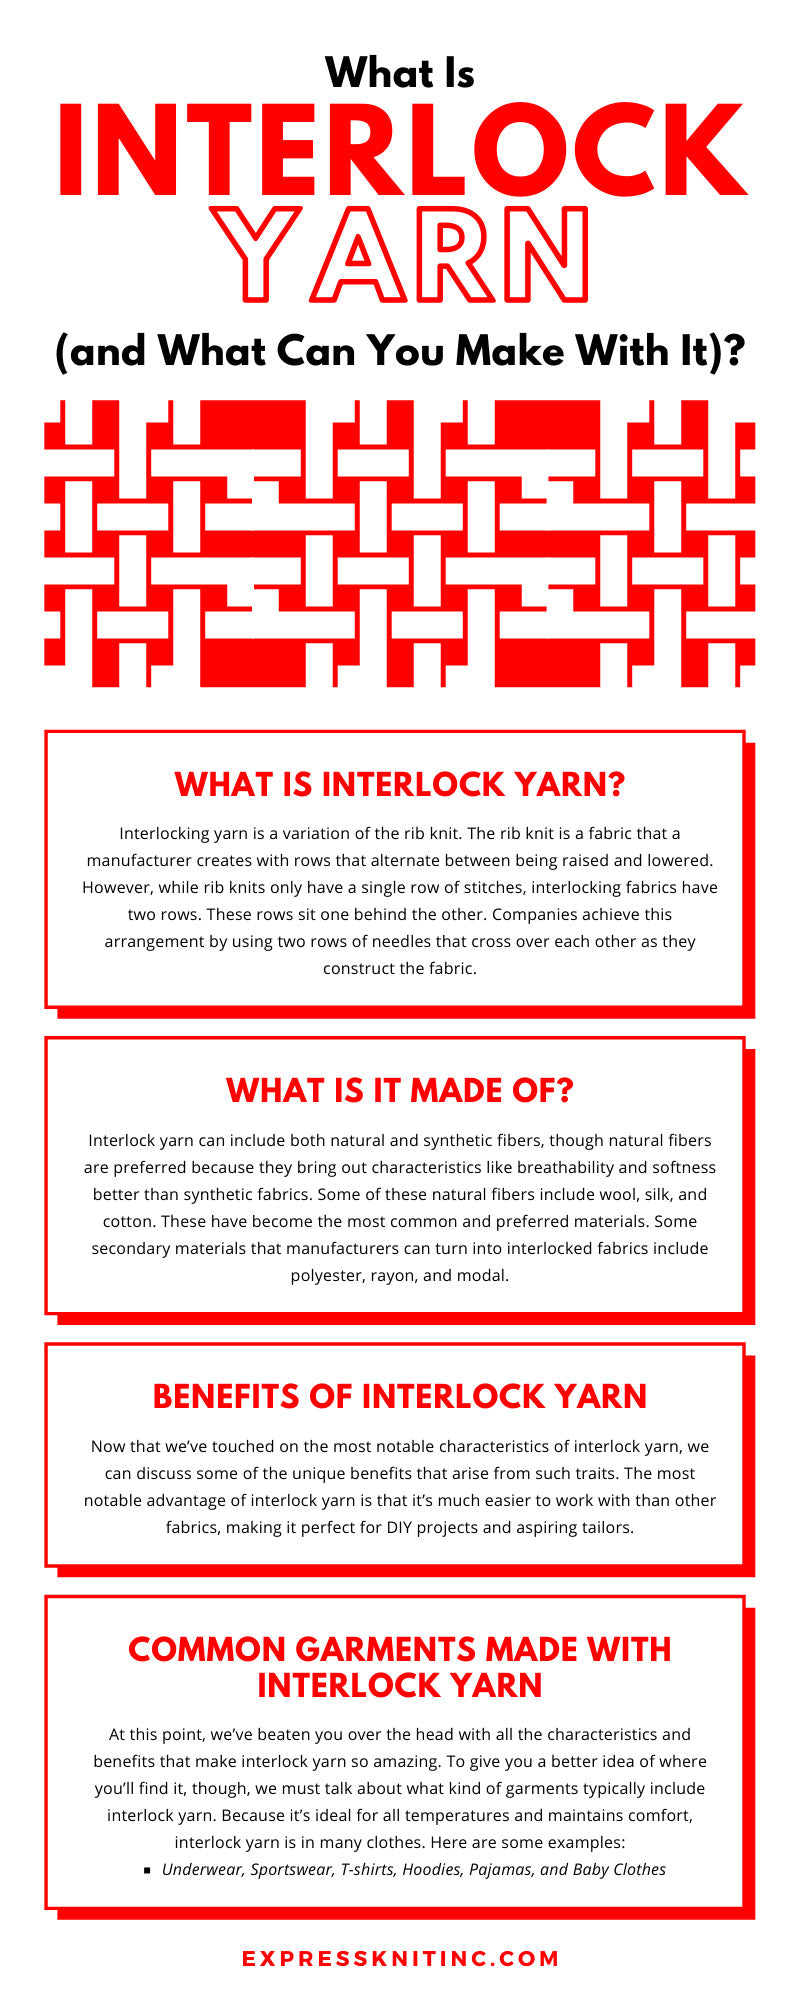 What Is Interlock Yarn (and What Can You Make With It)?